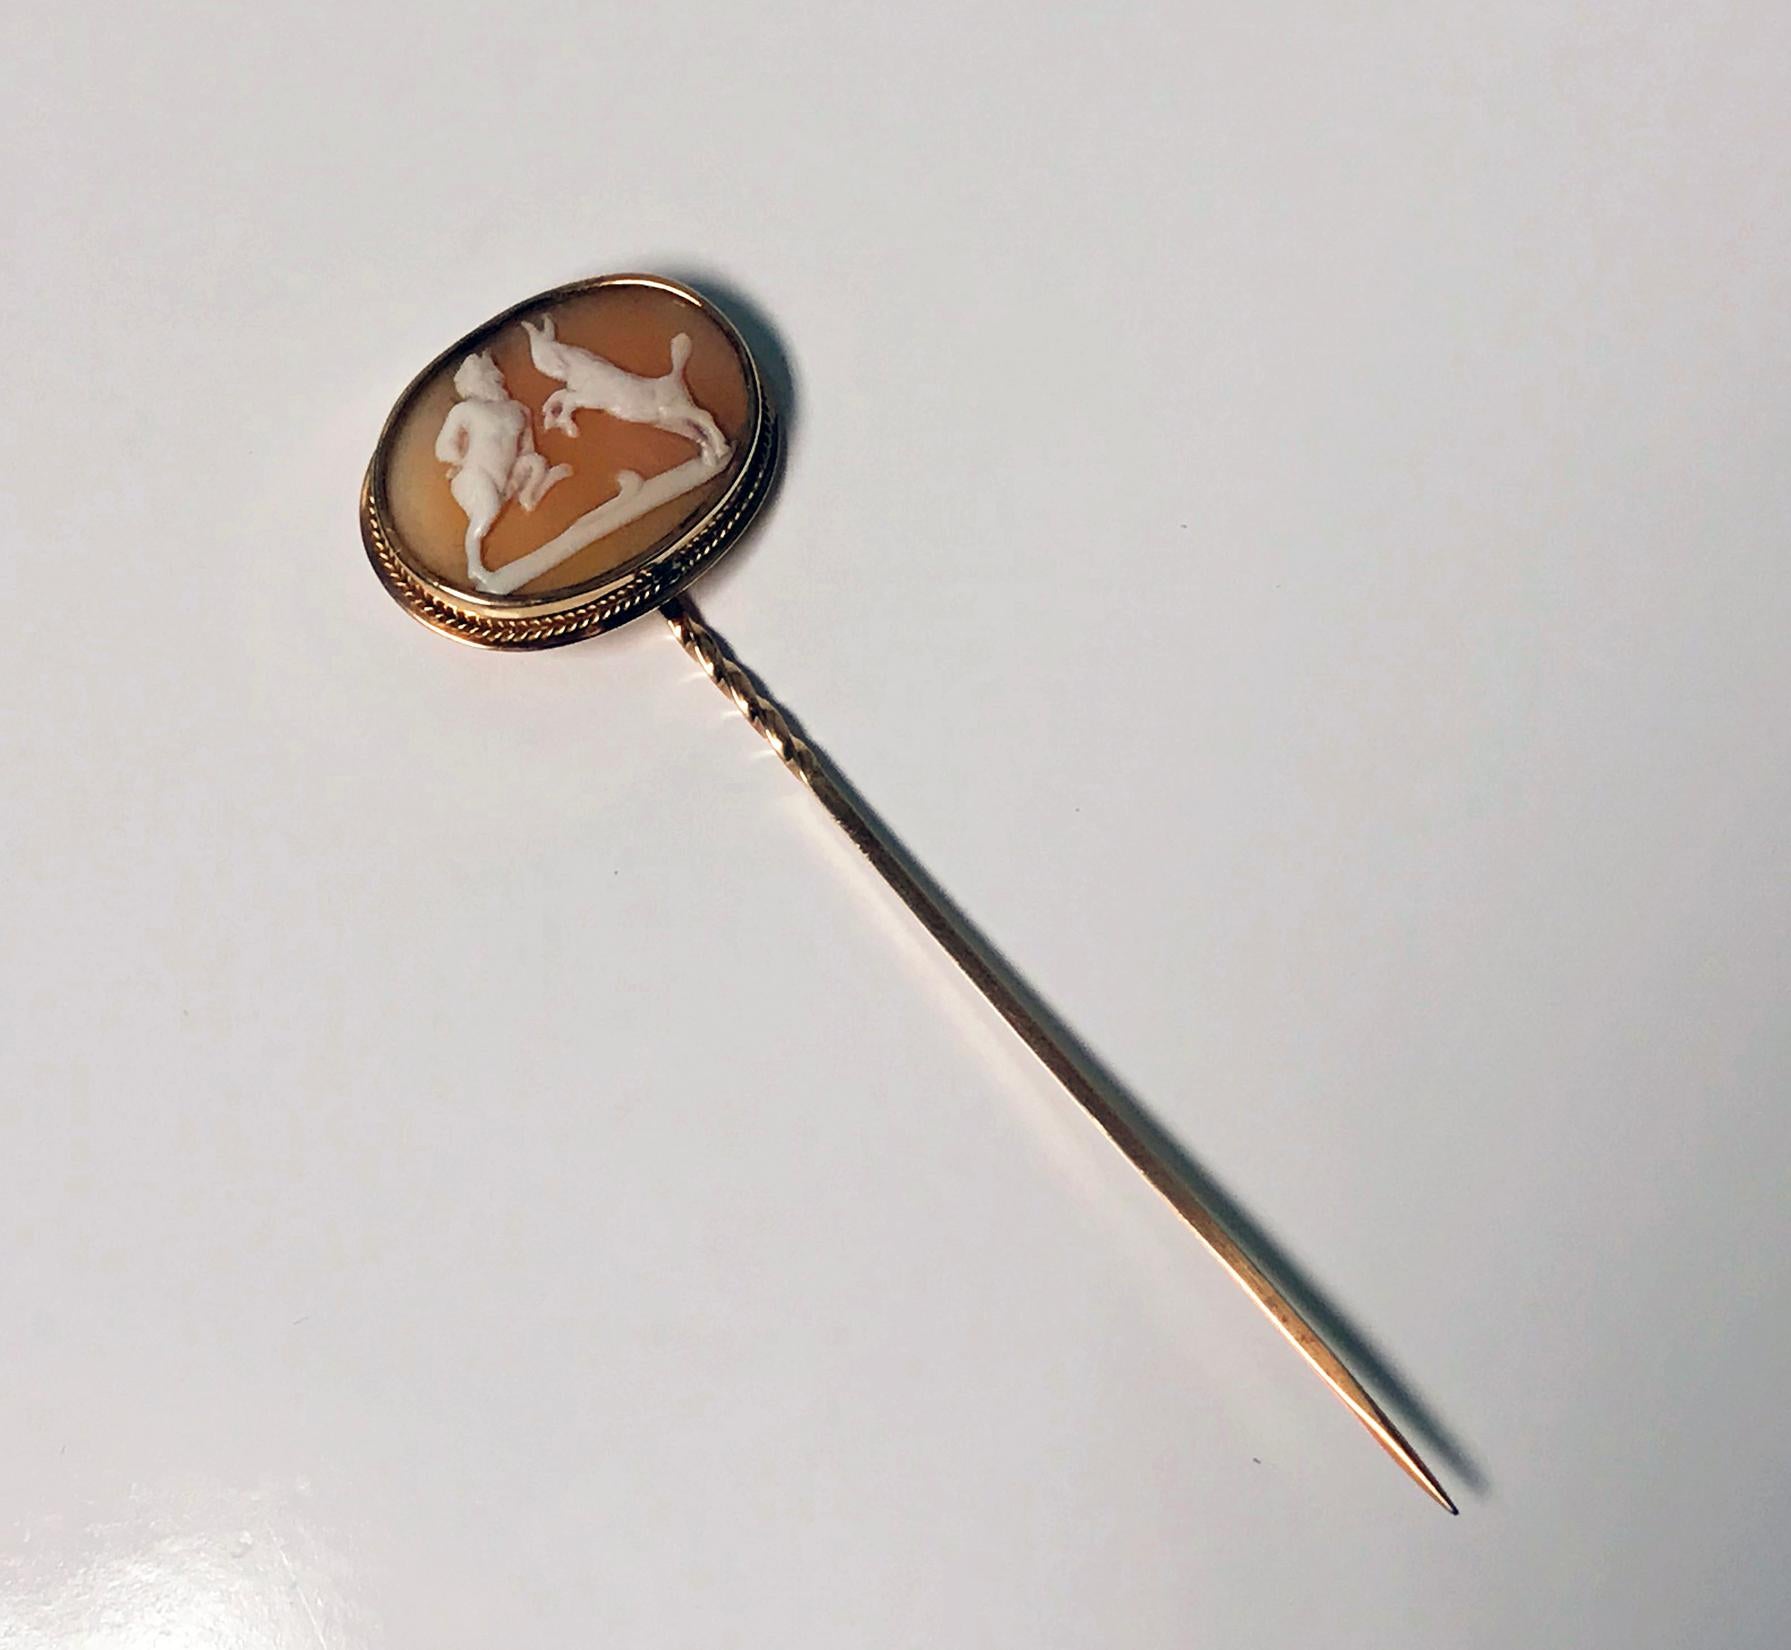 Fine antique Cameo Stickpin mounted in 15-karat (acid tested) rose gold, circa 1875. The shell cameo well carved depicting a Satyr sparring with a Goat, oval shape the surround gold bezel with fine rope border. Length: 3.5 inches. Cameo itself